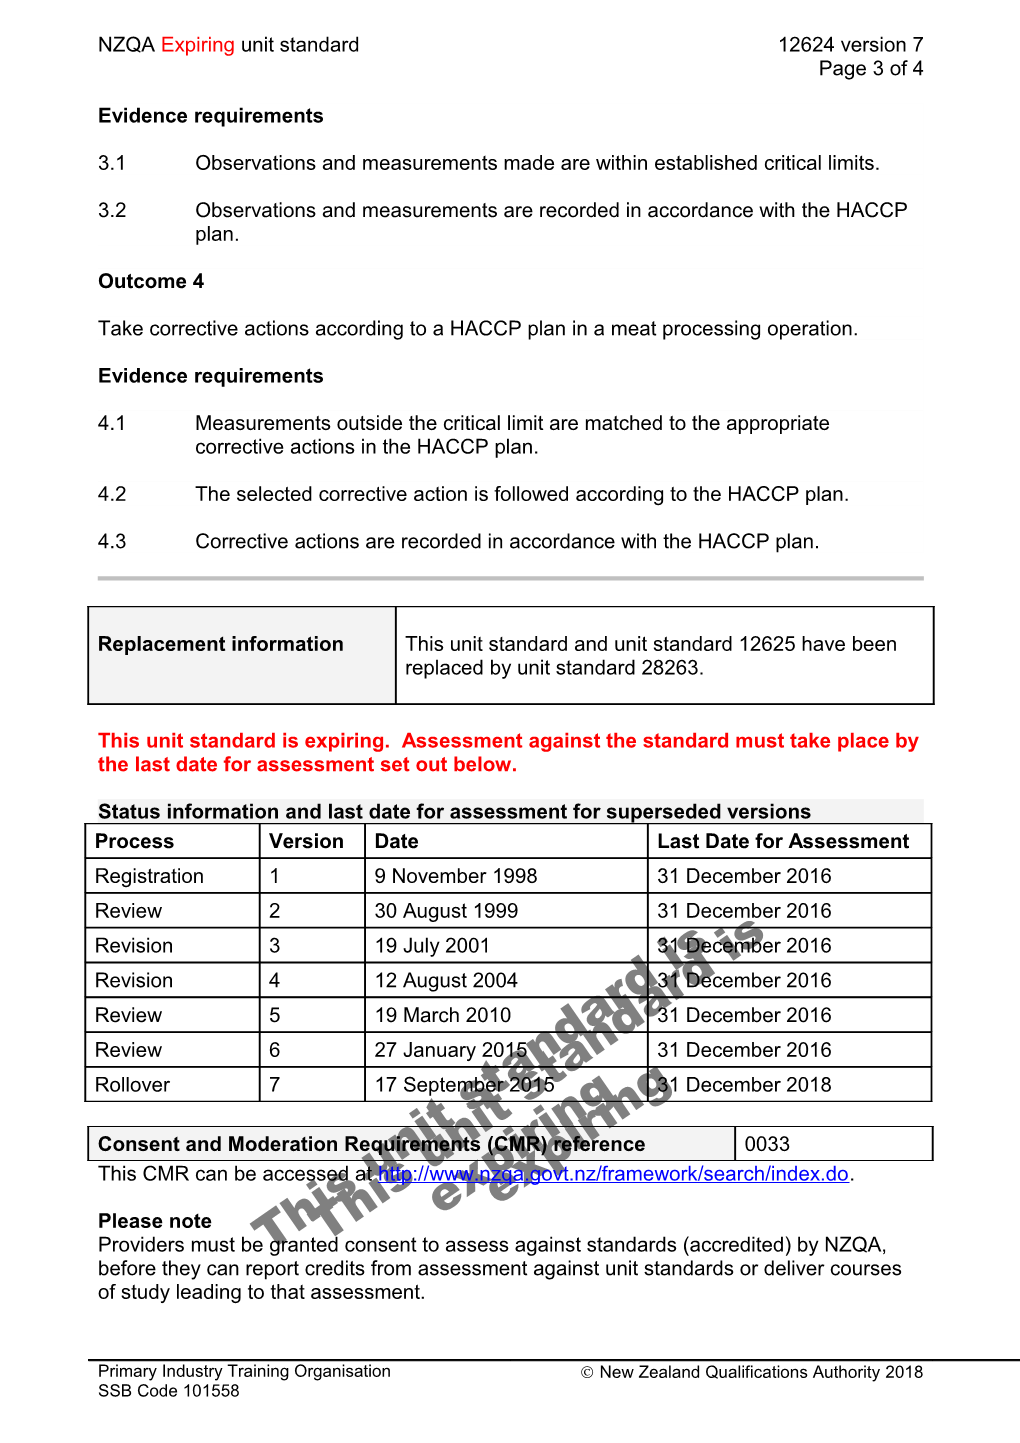 12624 Monitor a Meat Processing Operation Under a HACCP System